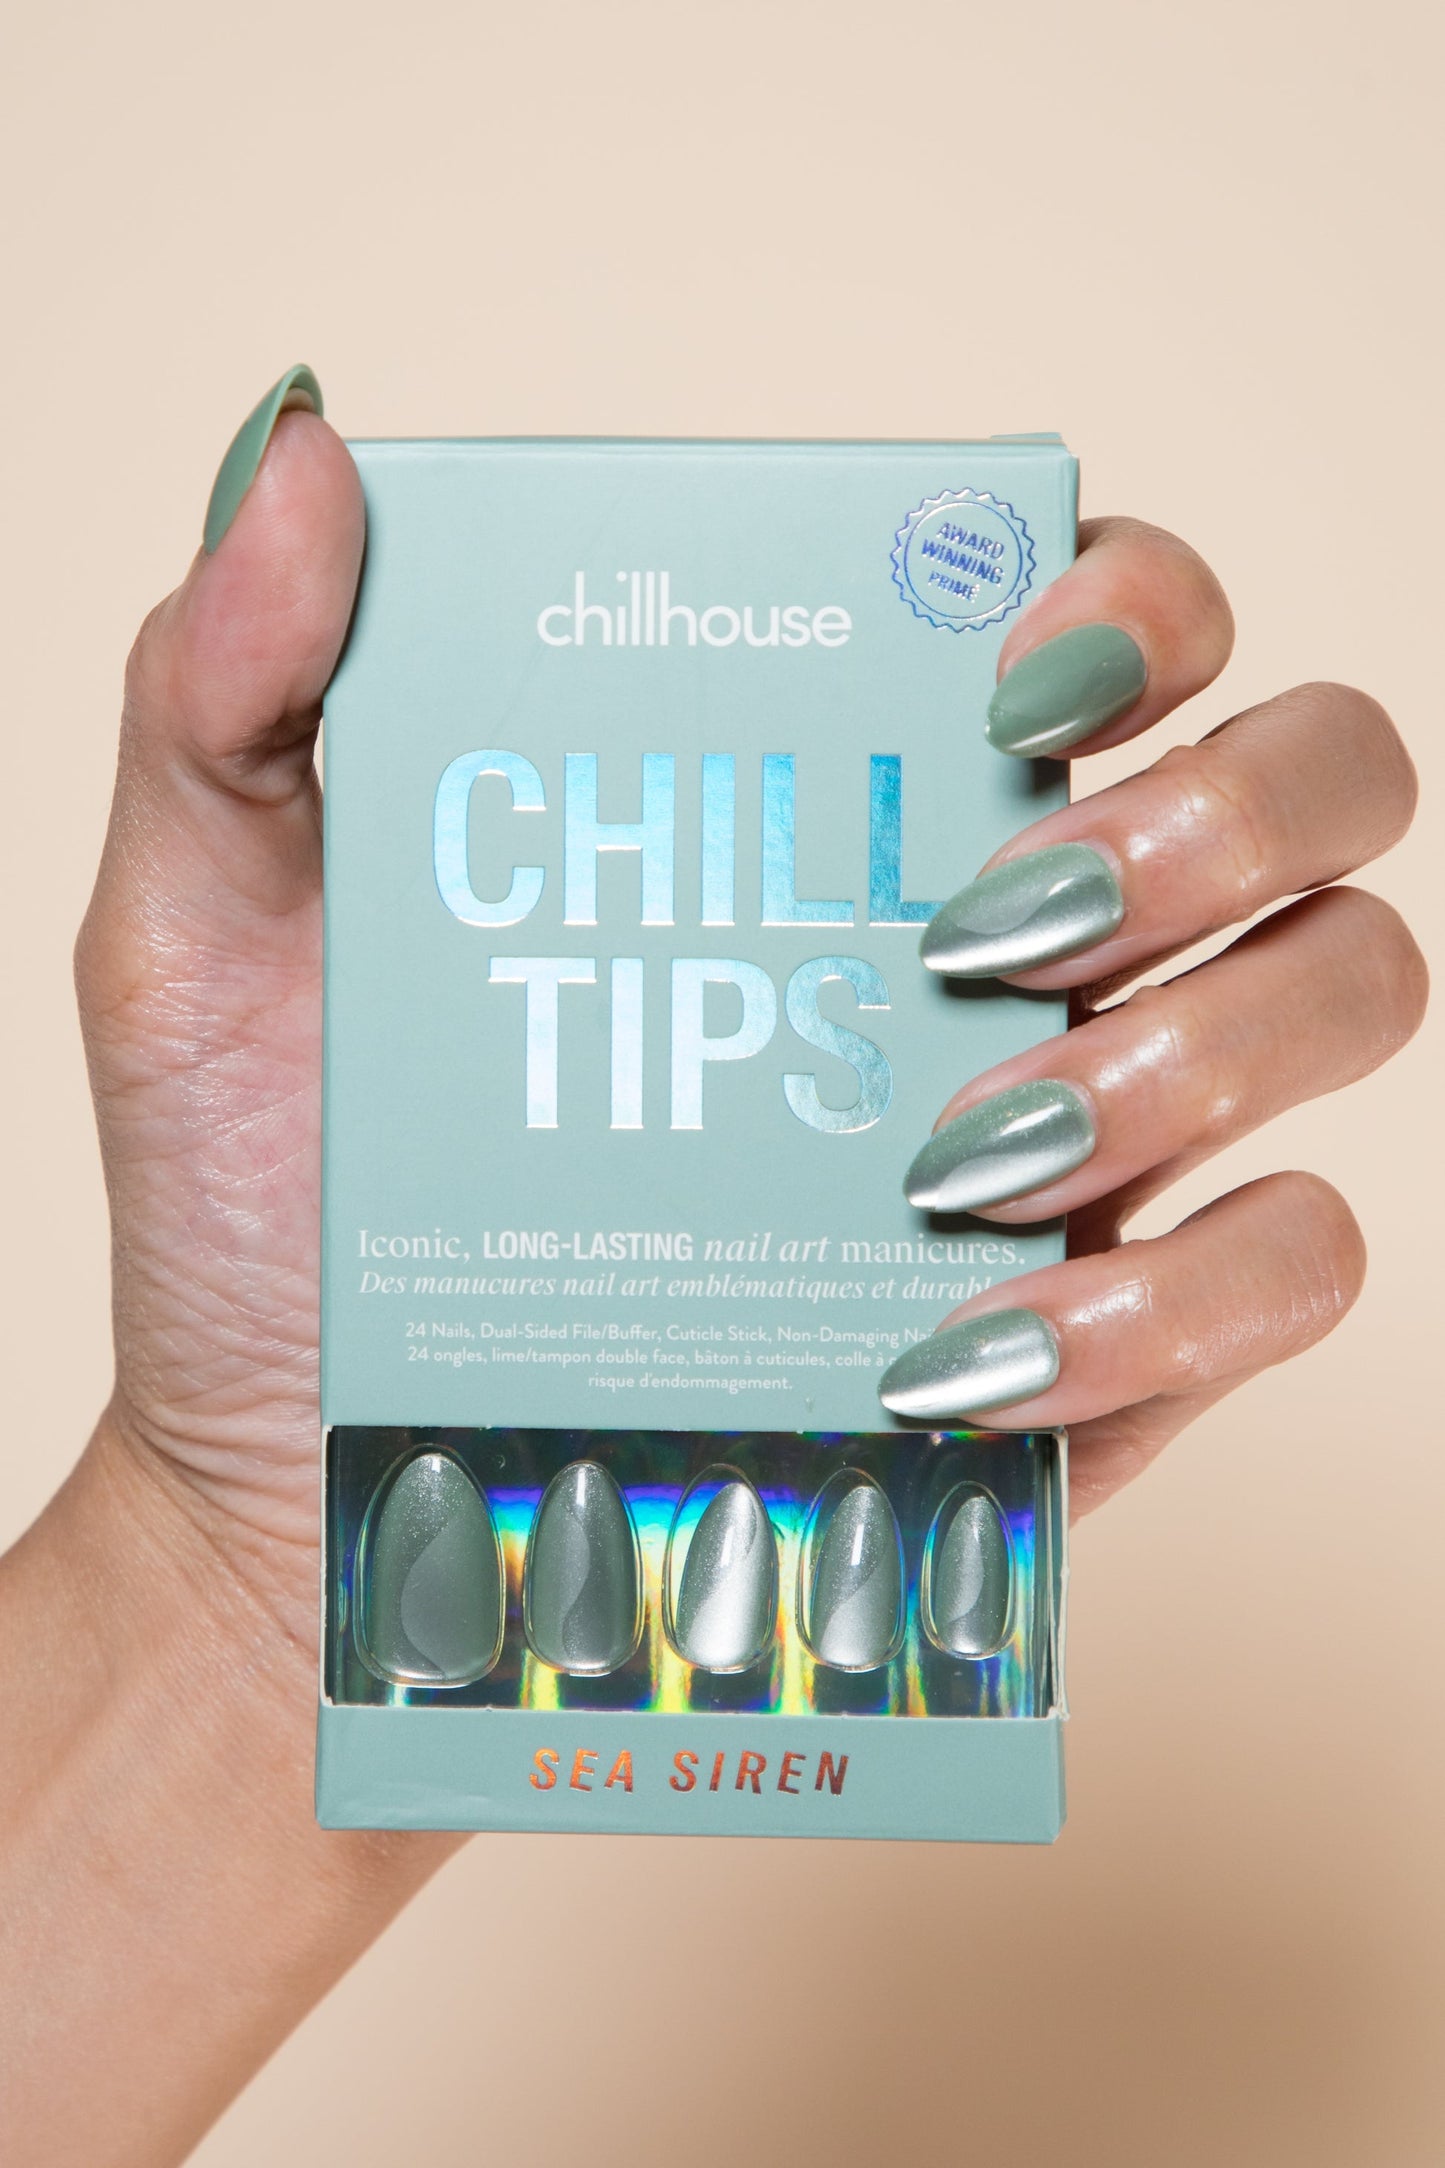 Chill Tips Sea Siren (Almond)) by Chillhouse